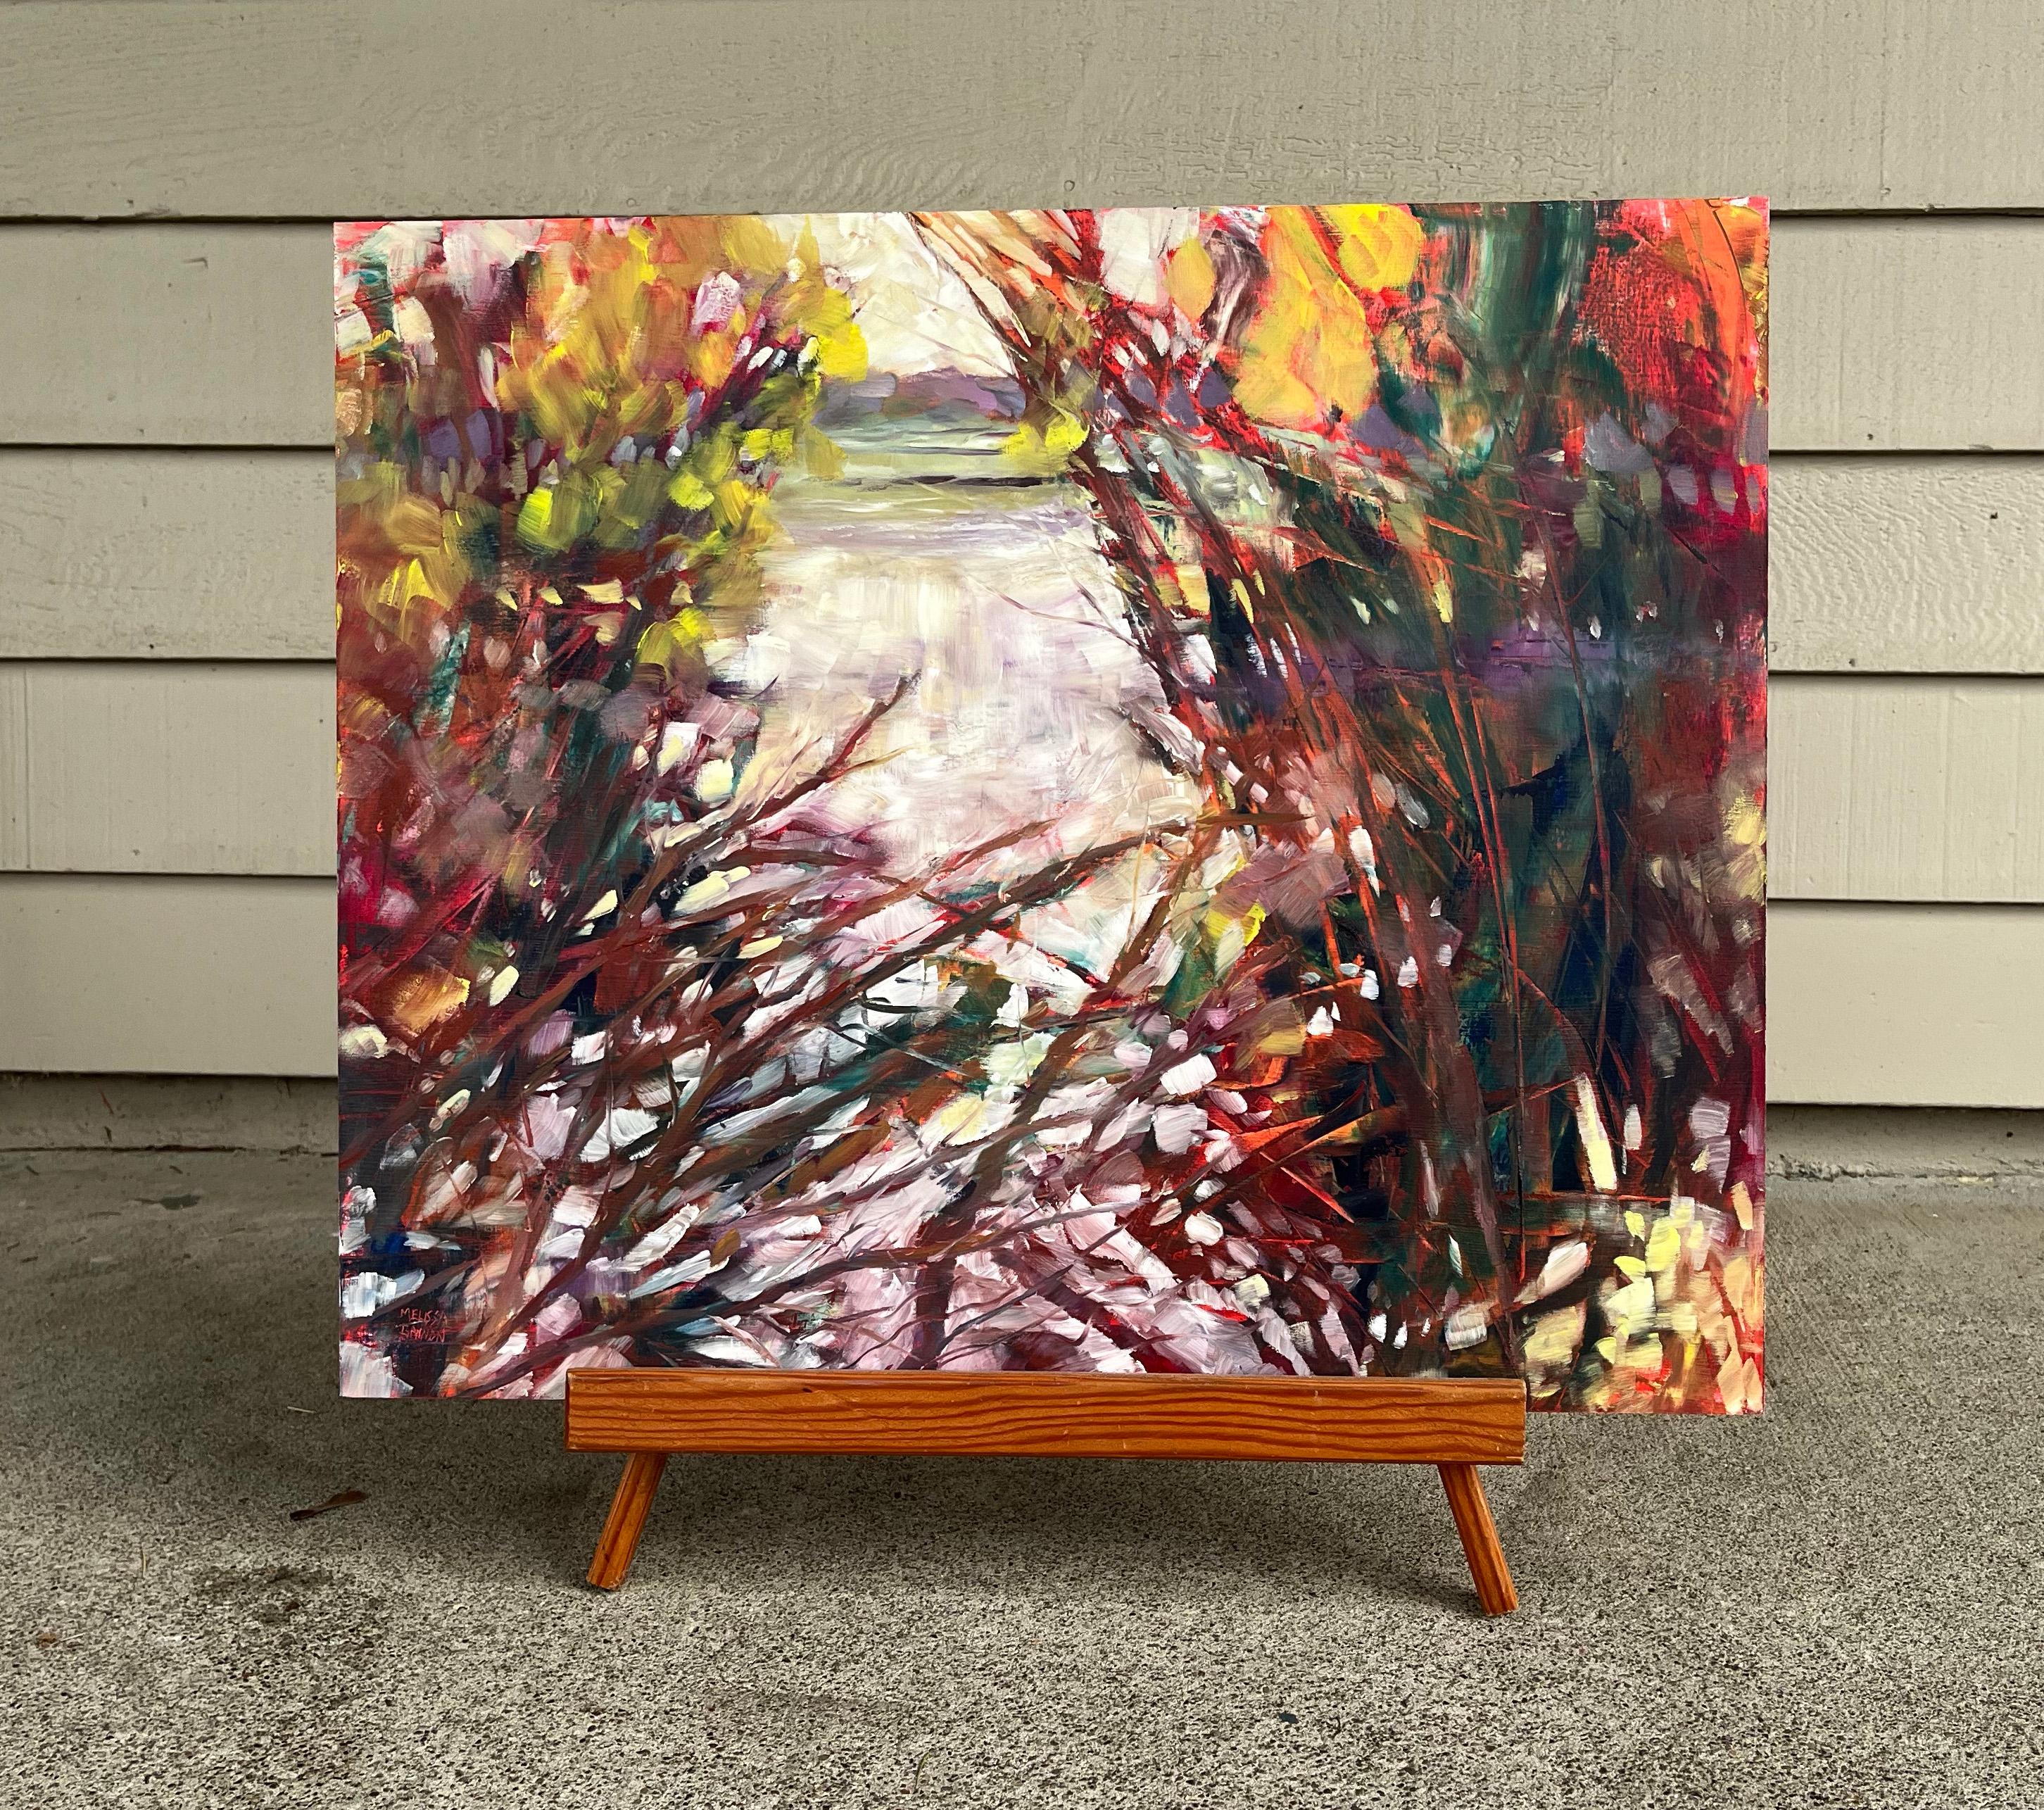 <p>Artist Comments<br>In the fall and winter, the woods along the river reveal the remnants of summer flowers, tangled stems, and leaves. Starting with oils and cold wax, artist Melissa Gannon unveils orange hues through scratching and layer removal